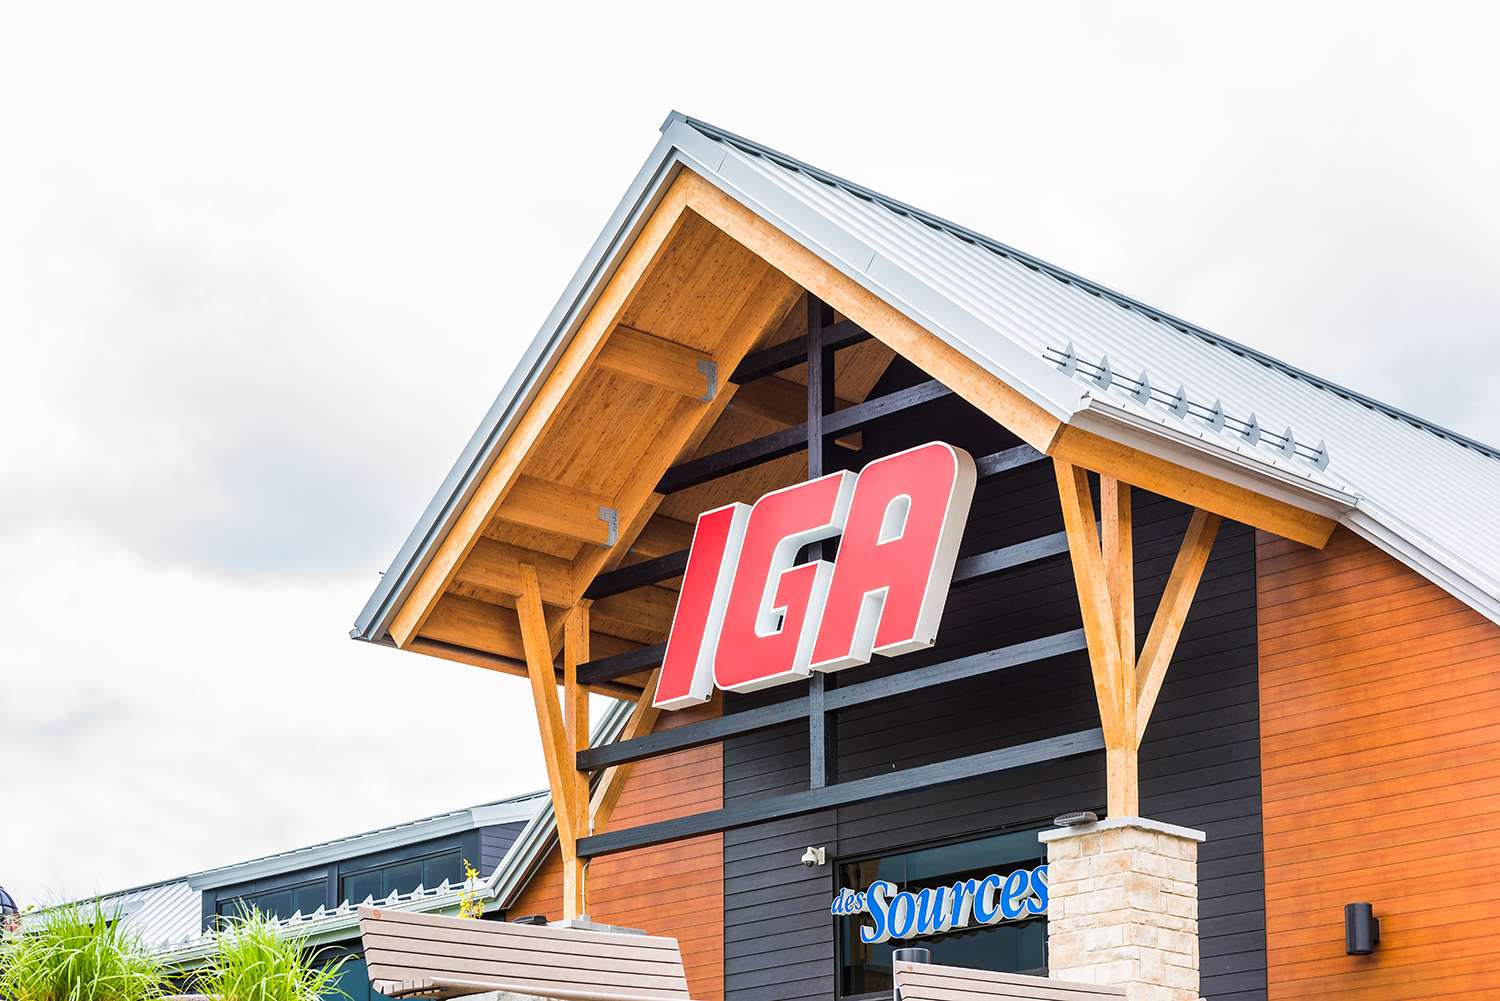 IGA and Ideal Launch First-Ever Retail Media Network for Independent Grocers